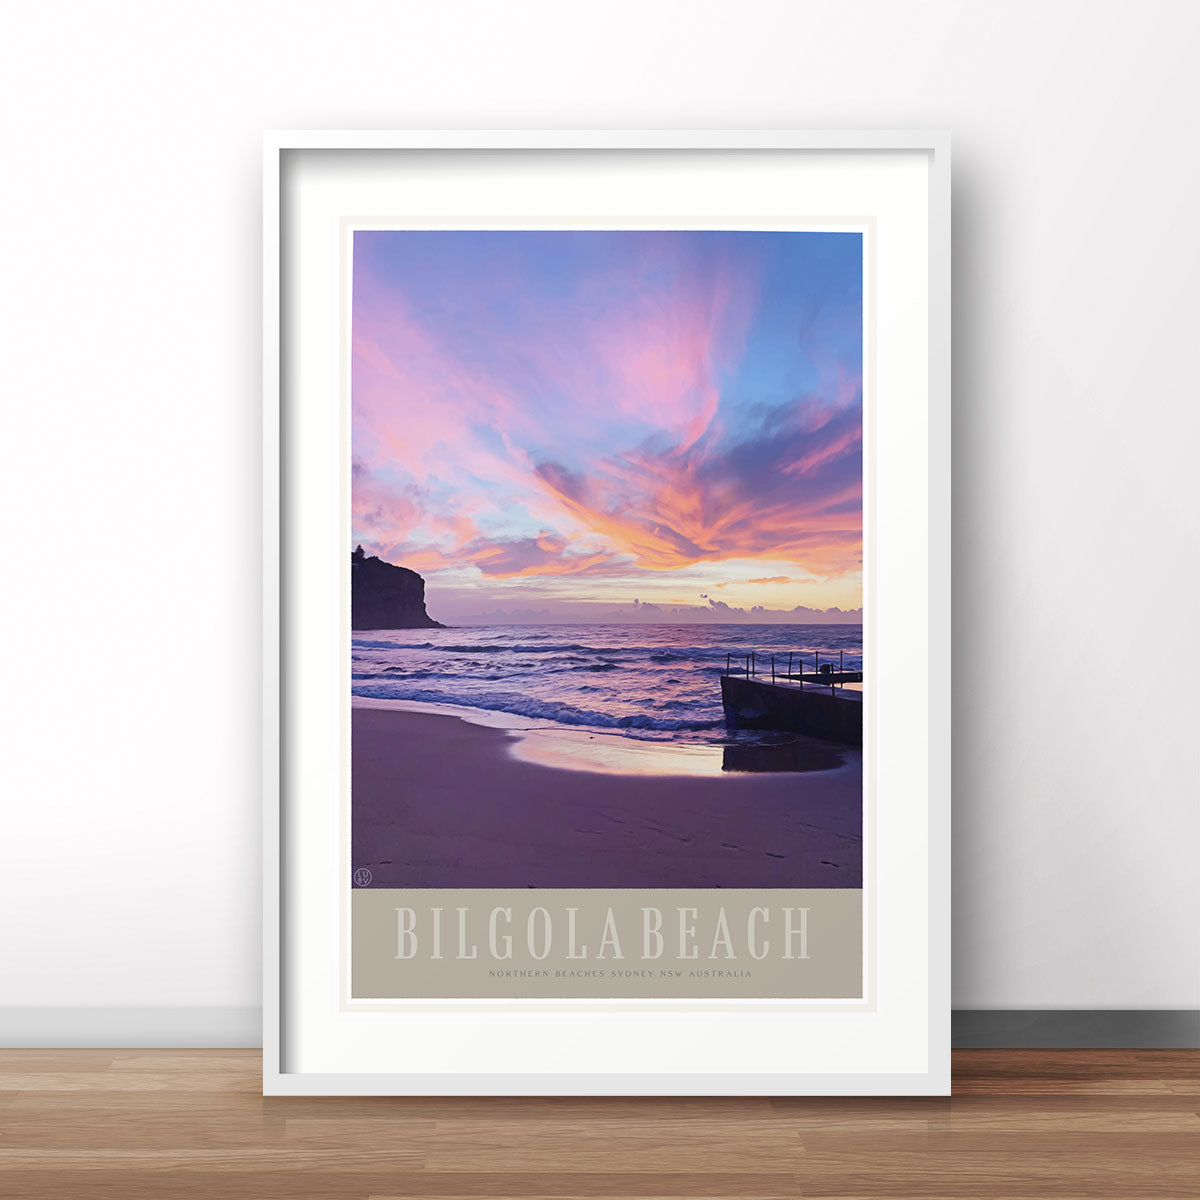 Bilgola Beach retro vintage travel poster print from Places We Luv